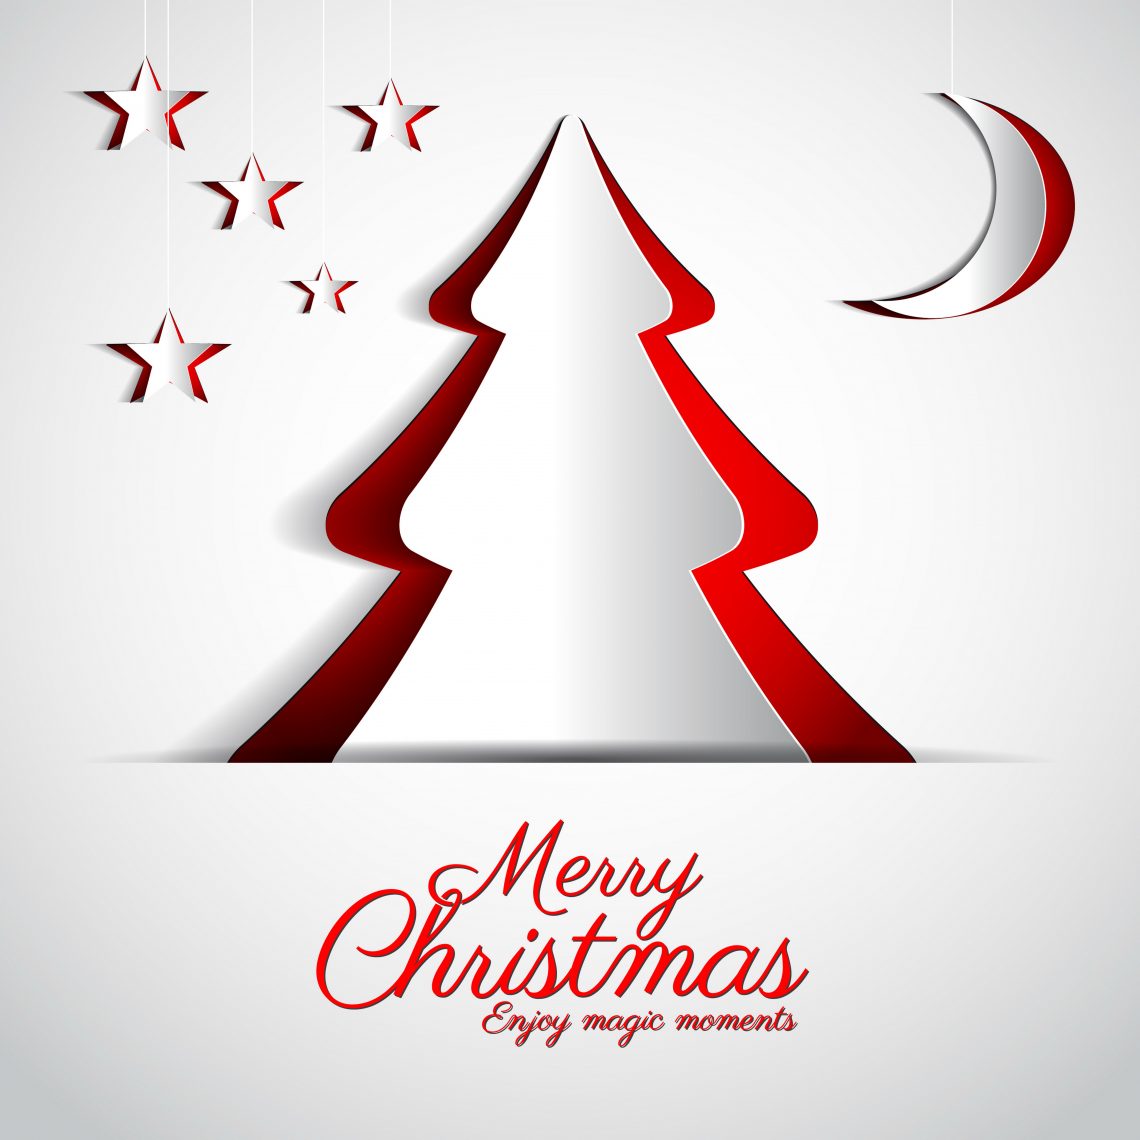 merry christmas greeting template